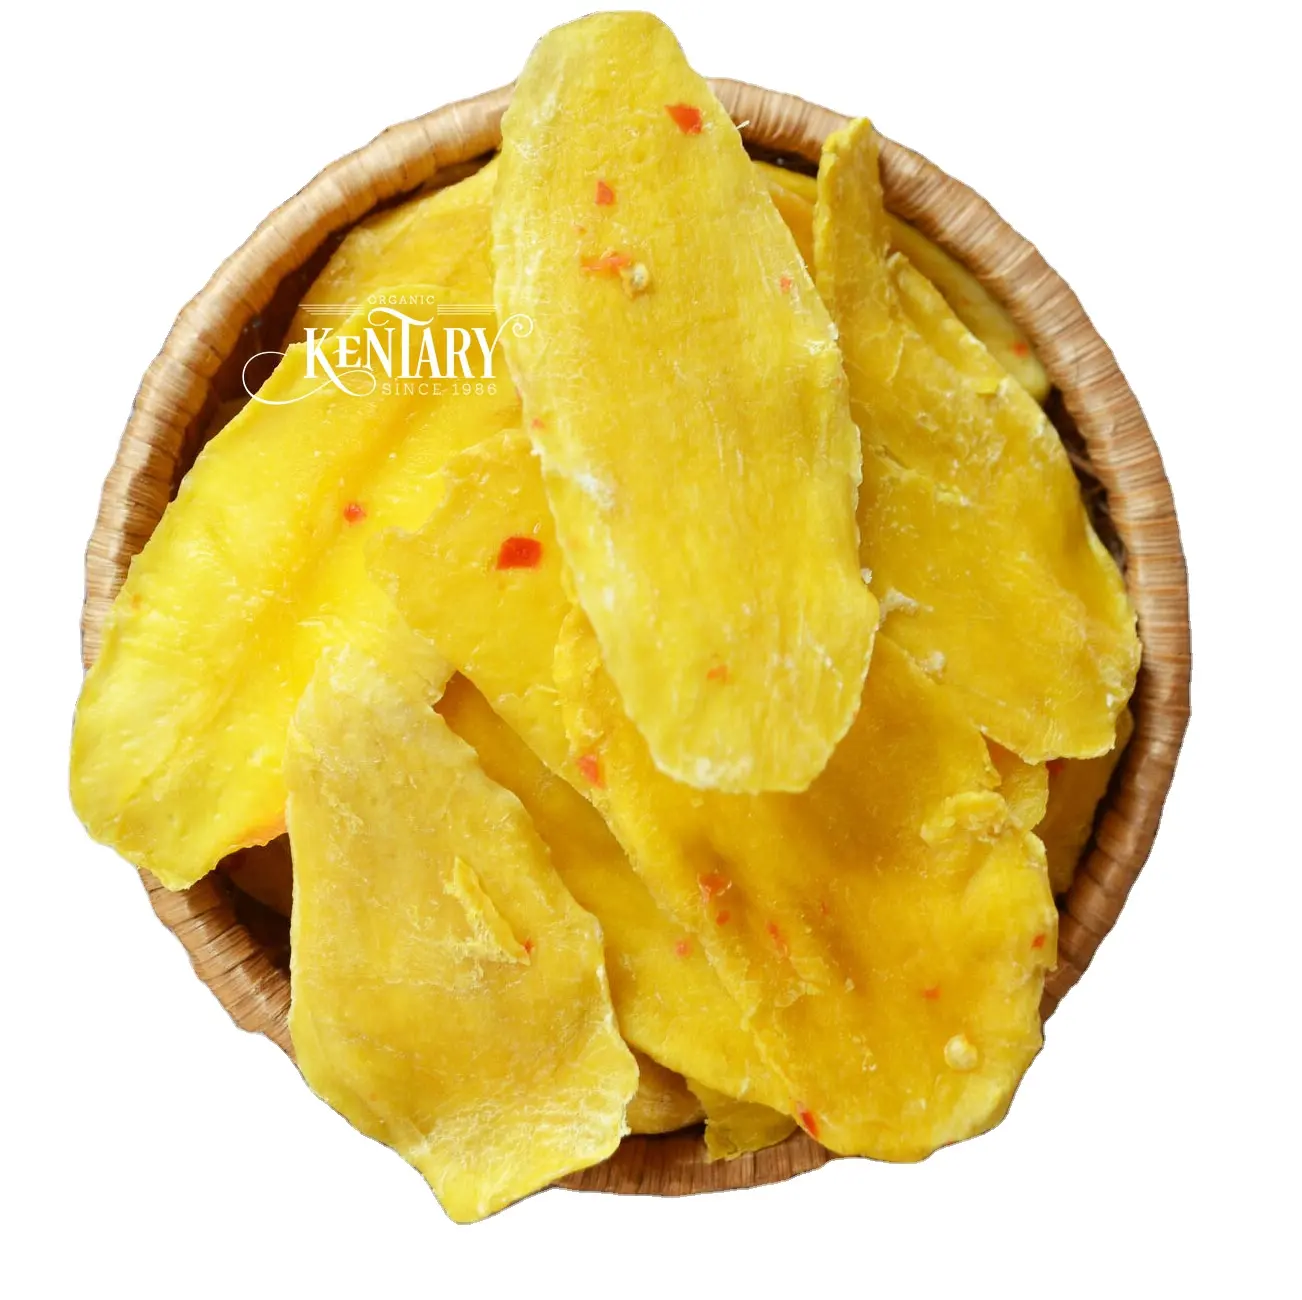 Soft Dried Mango Light Spicy Slices 100% Natural Hight quality Made in Vietnam Healthy Snack Best Price for picnic Unsweetened